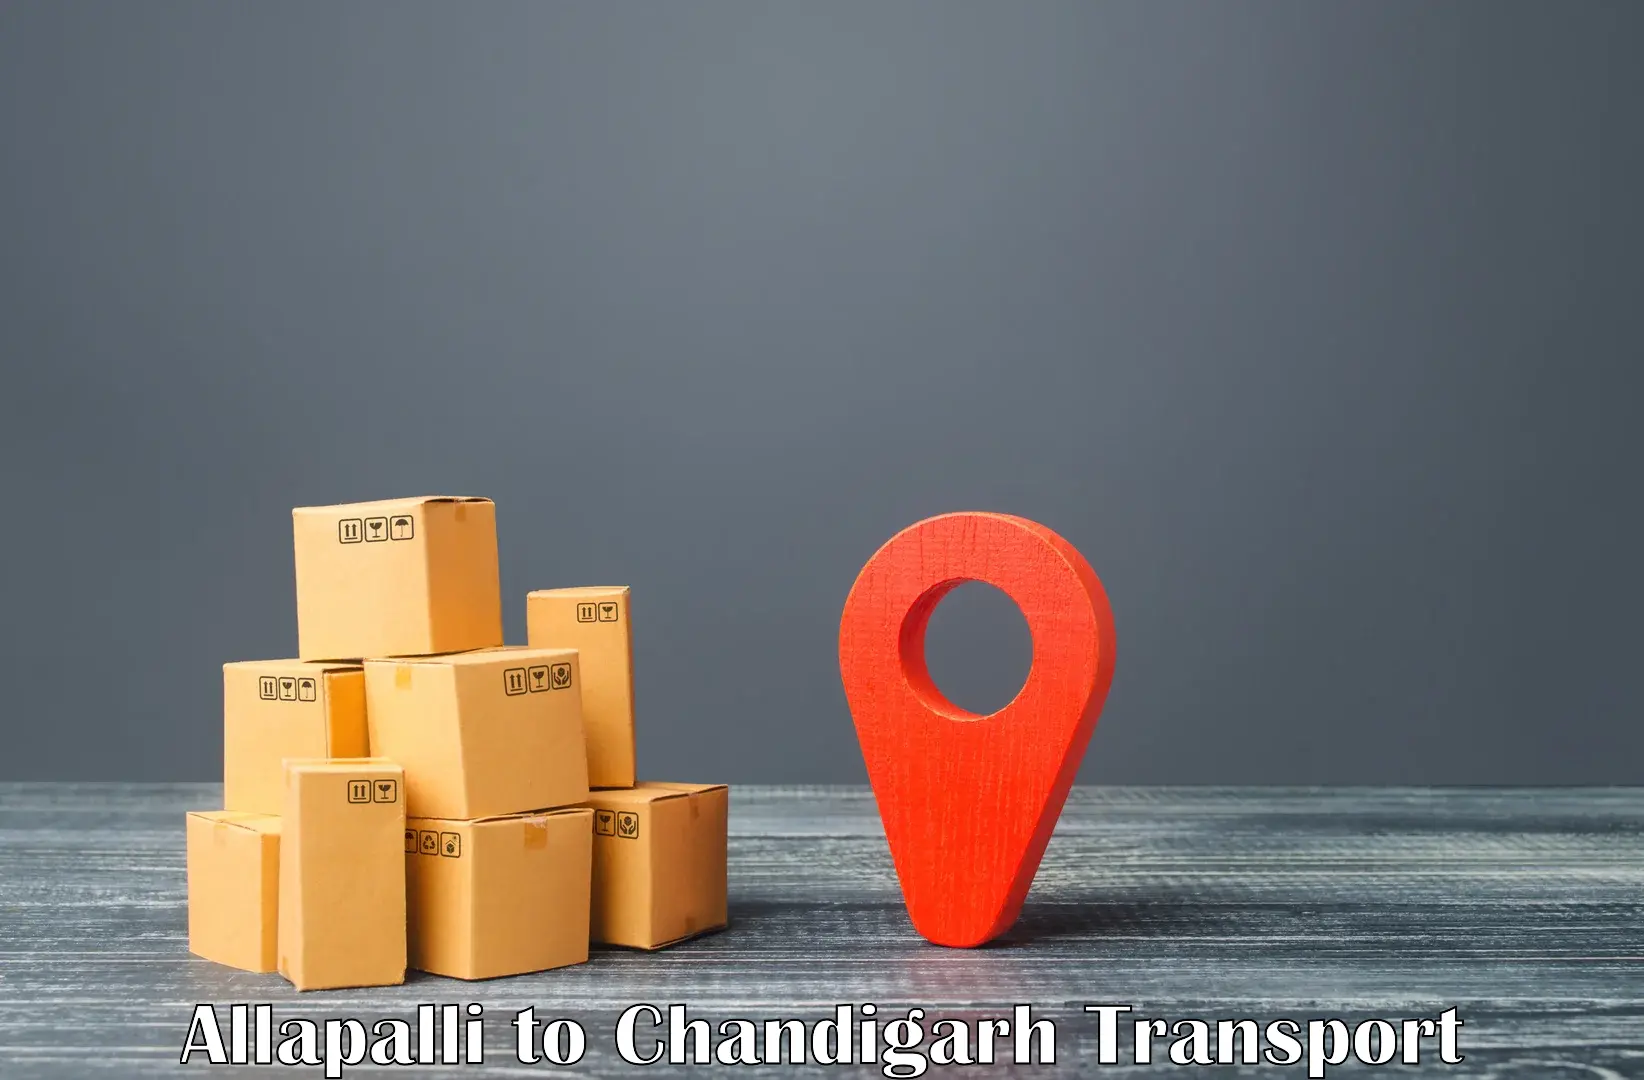 Air freight transport services Allapalli to Chandigarh